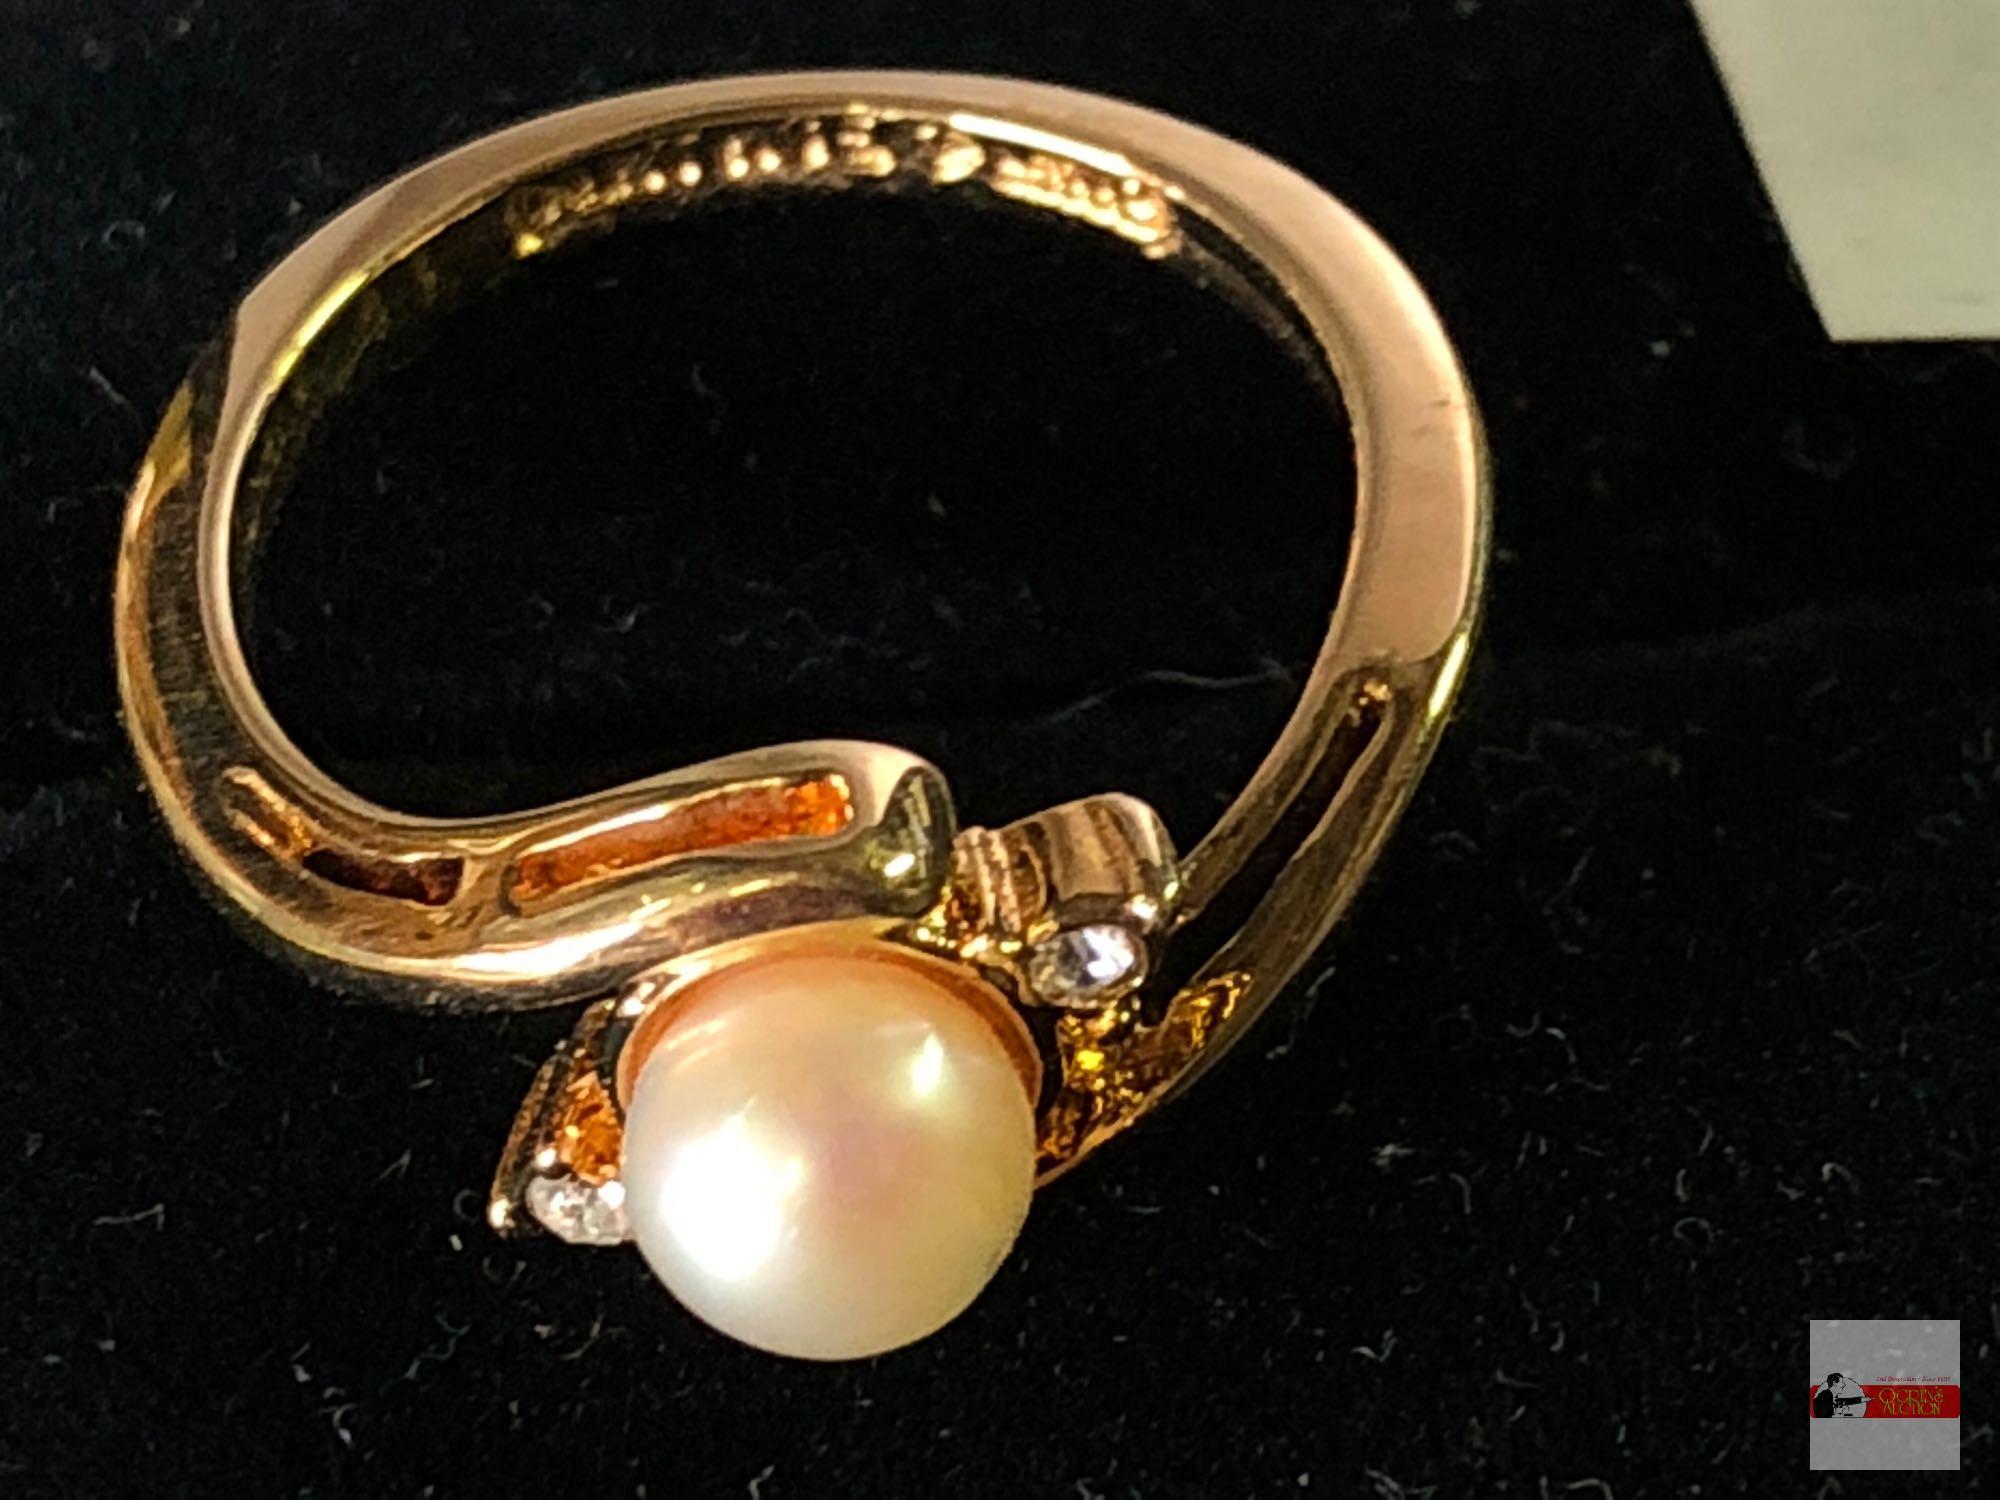 Jewelry - Ring - triple cluster pearls with clear stone center